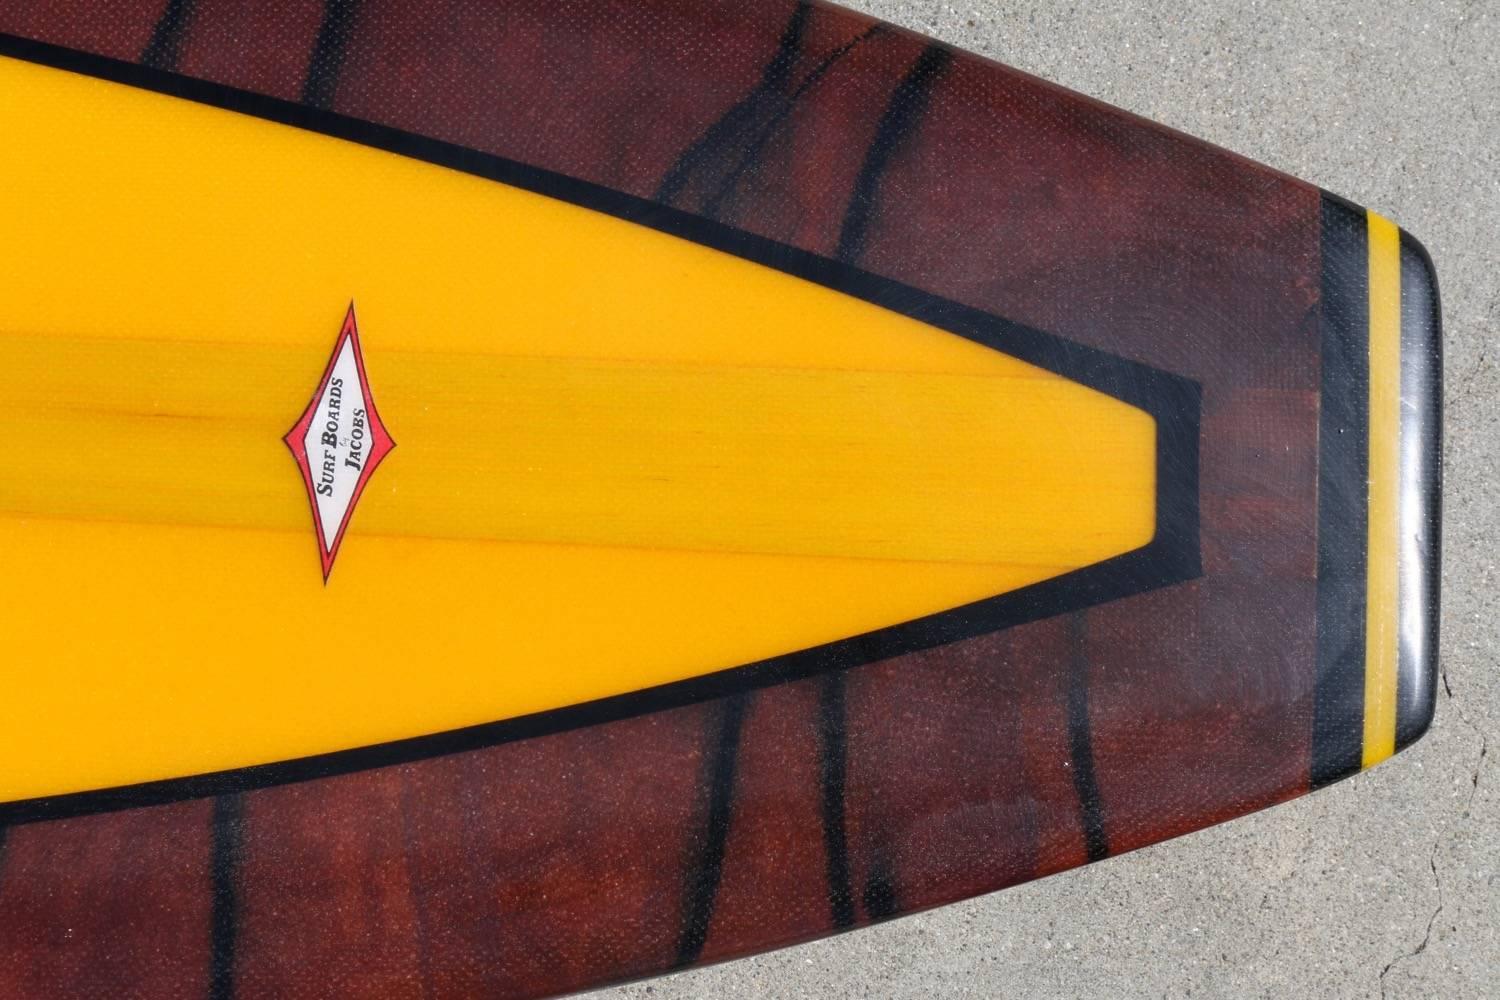 American Mid-1960s Jacobs Multi-Logo Surfboard, Fully Restored, Yellow with Acid Splash